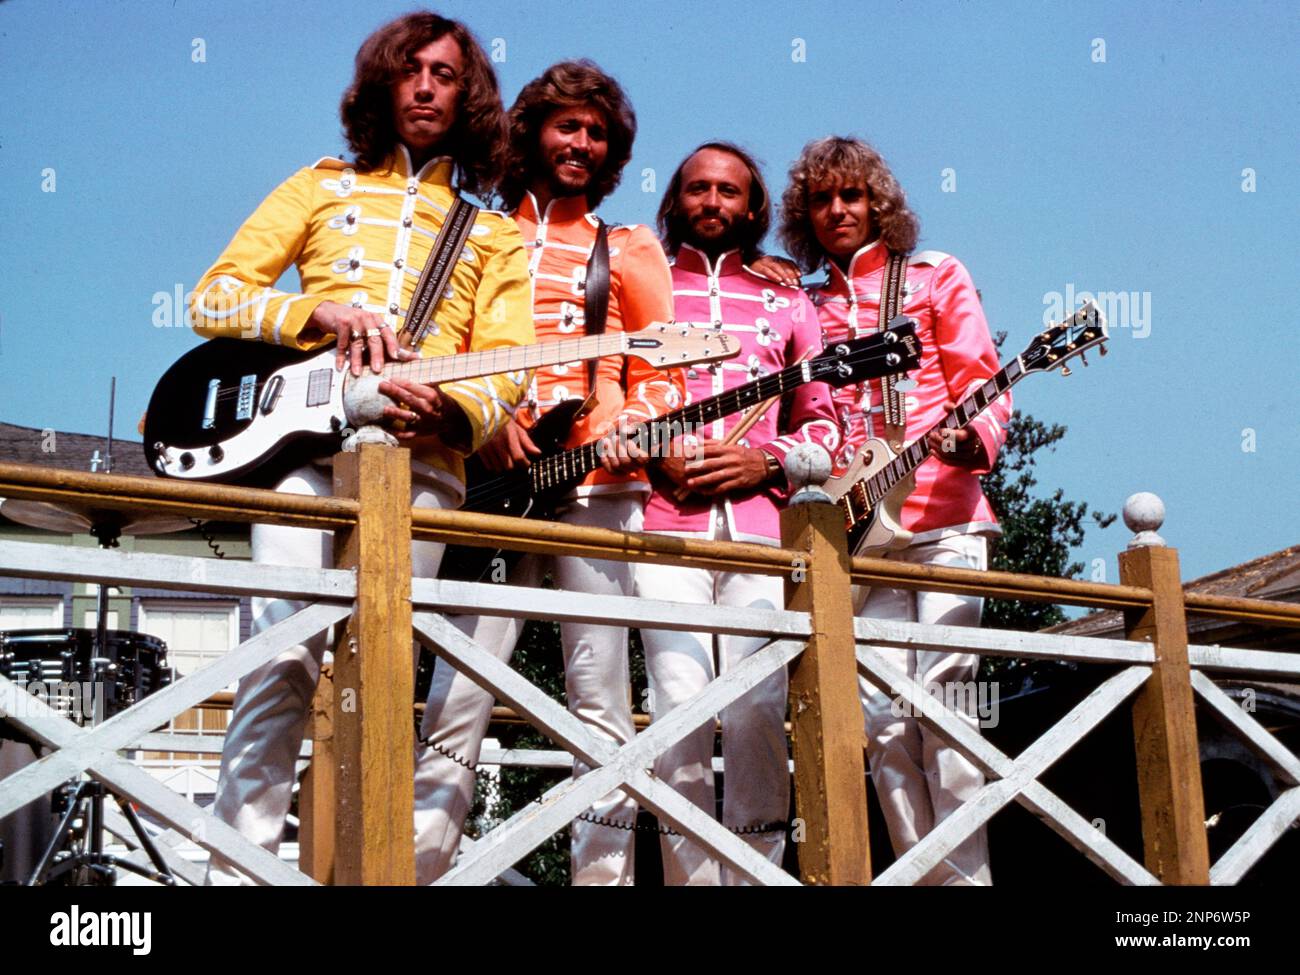 PETER FRAMPTON, ROBIN GIBB, MAURICE GIBB and BARRY GIBB in SGT. PEPPER'S LONELY HEARTS CLUB BAND (1978), directed by MICHAEL SCHULTZ. Credit: PARAMOUNT PICTURES / Album Stock Photo